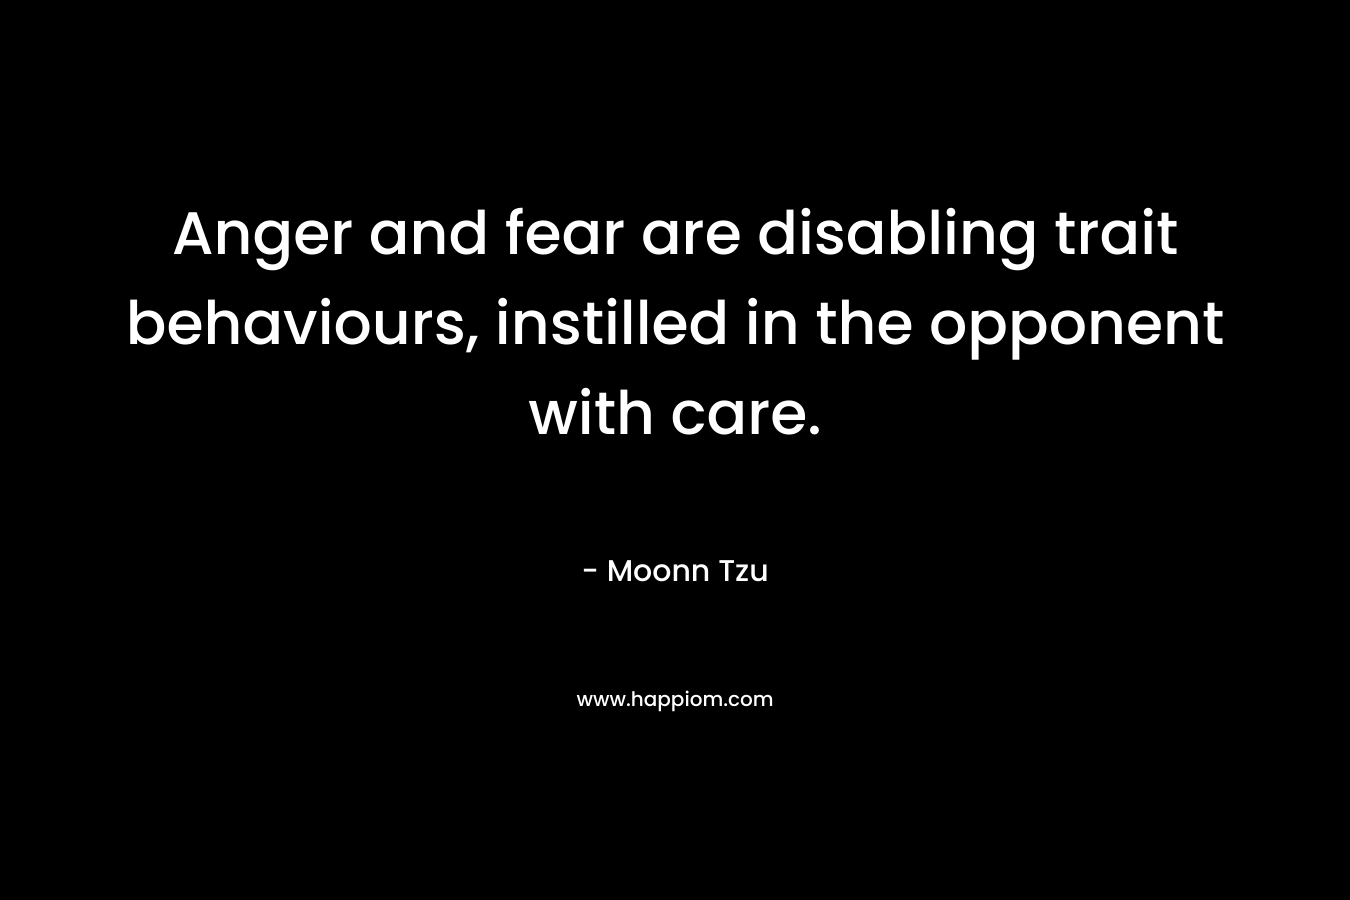 Anger and fear are disabling trait behaviours, instilled in the opponent with care. – Moonn Tzu